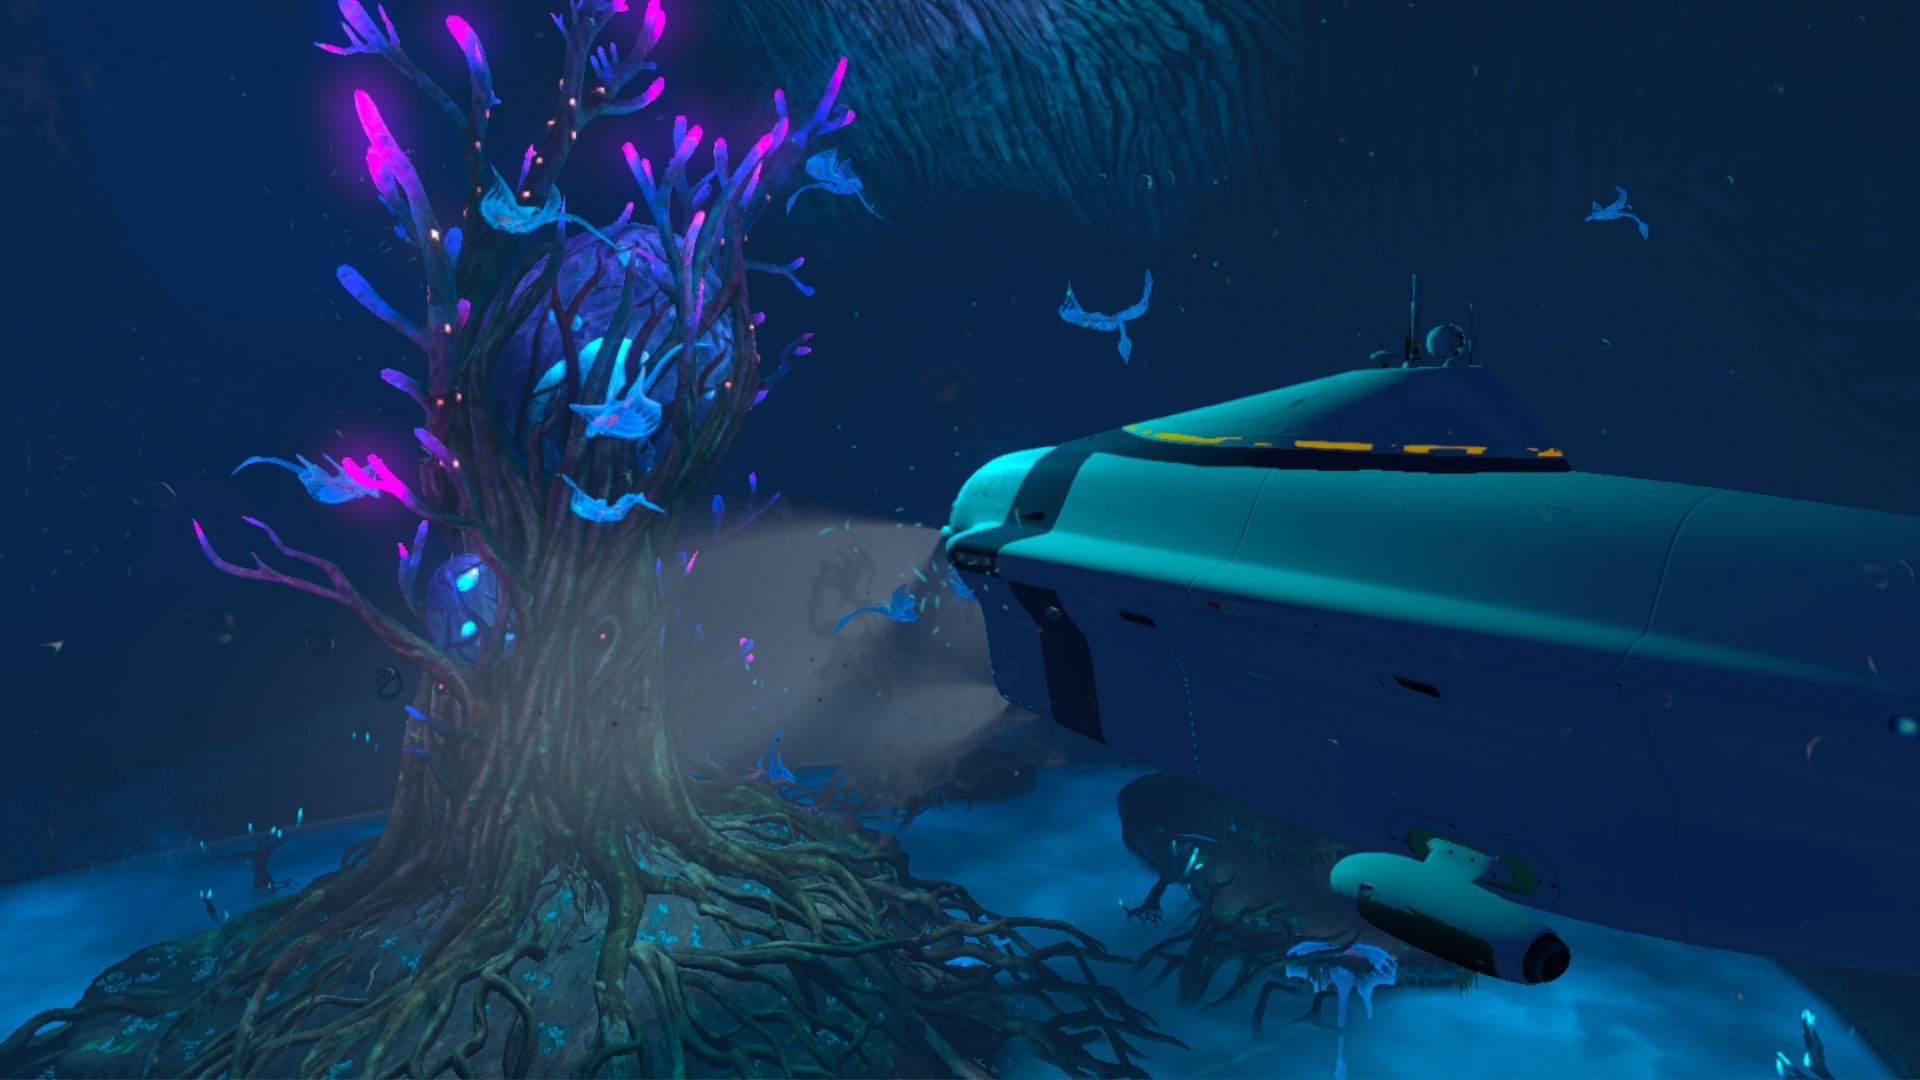 Subnautica сетчатое. Subnautica Левиафан Авроры. Сабнаутика 3. Нептун сабнатика. Сабнатика Затерянная река.